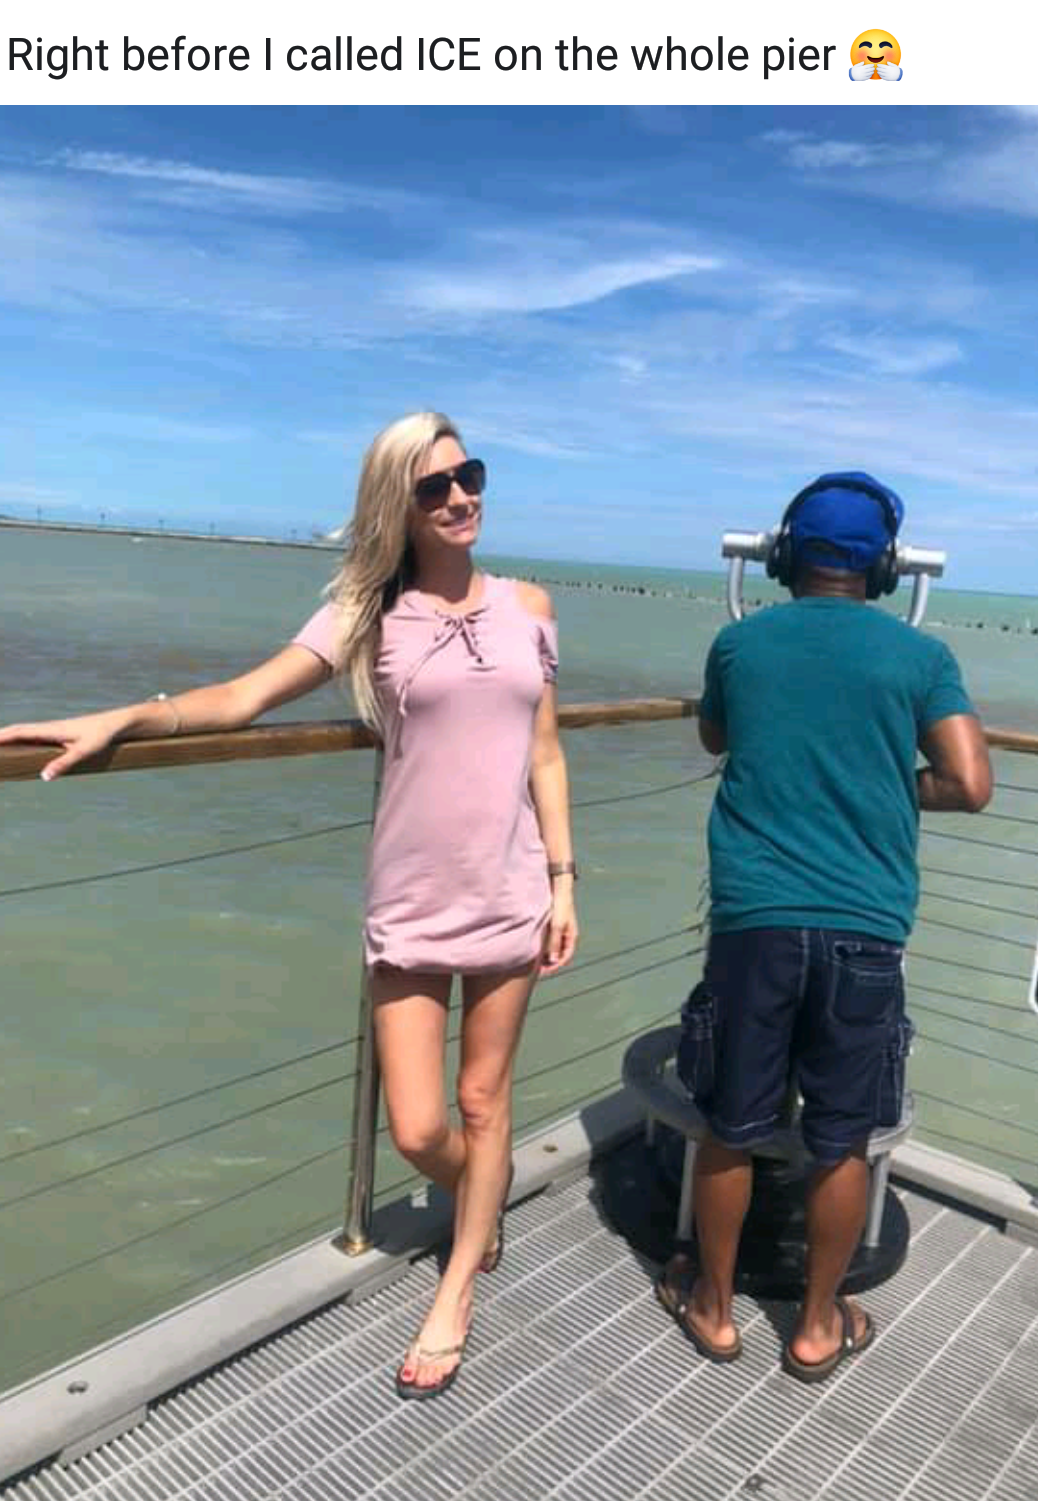 Right before I called Ice on the whole pier